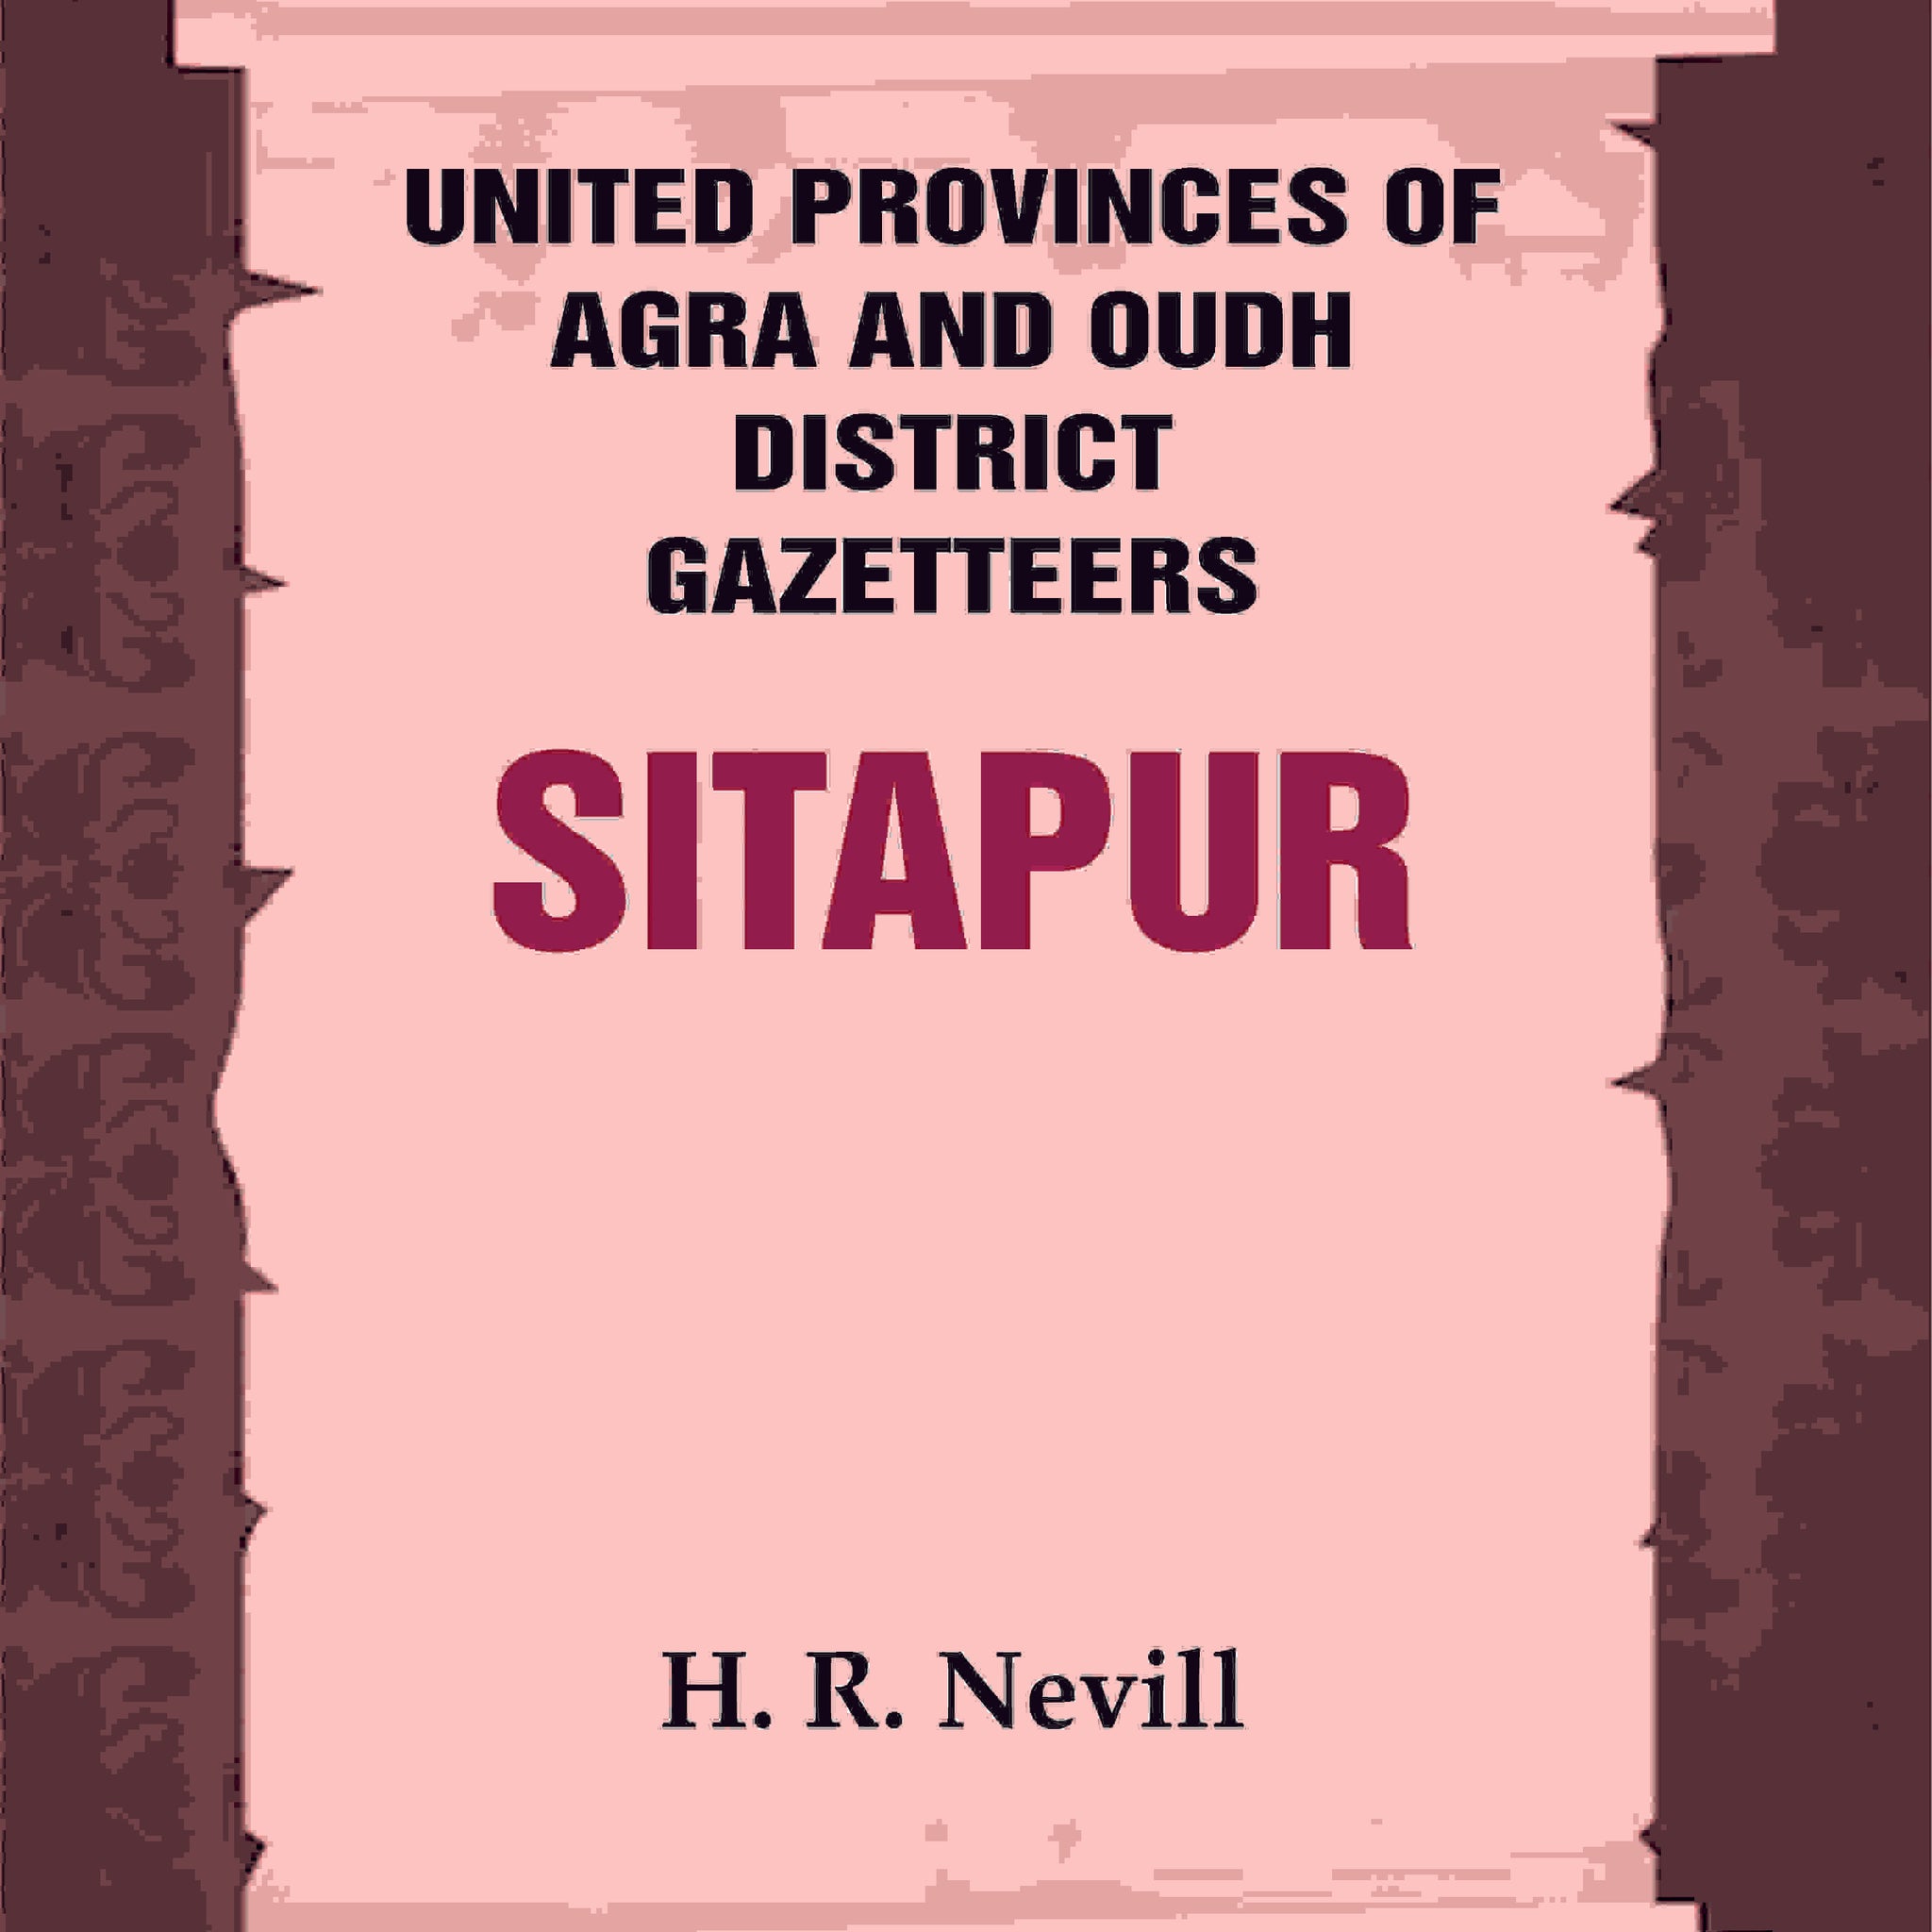 United Provinces of Agra and Oudh District Gazetteers: Sitapur